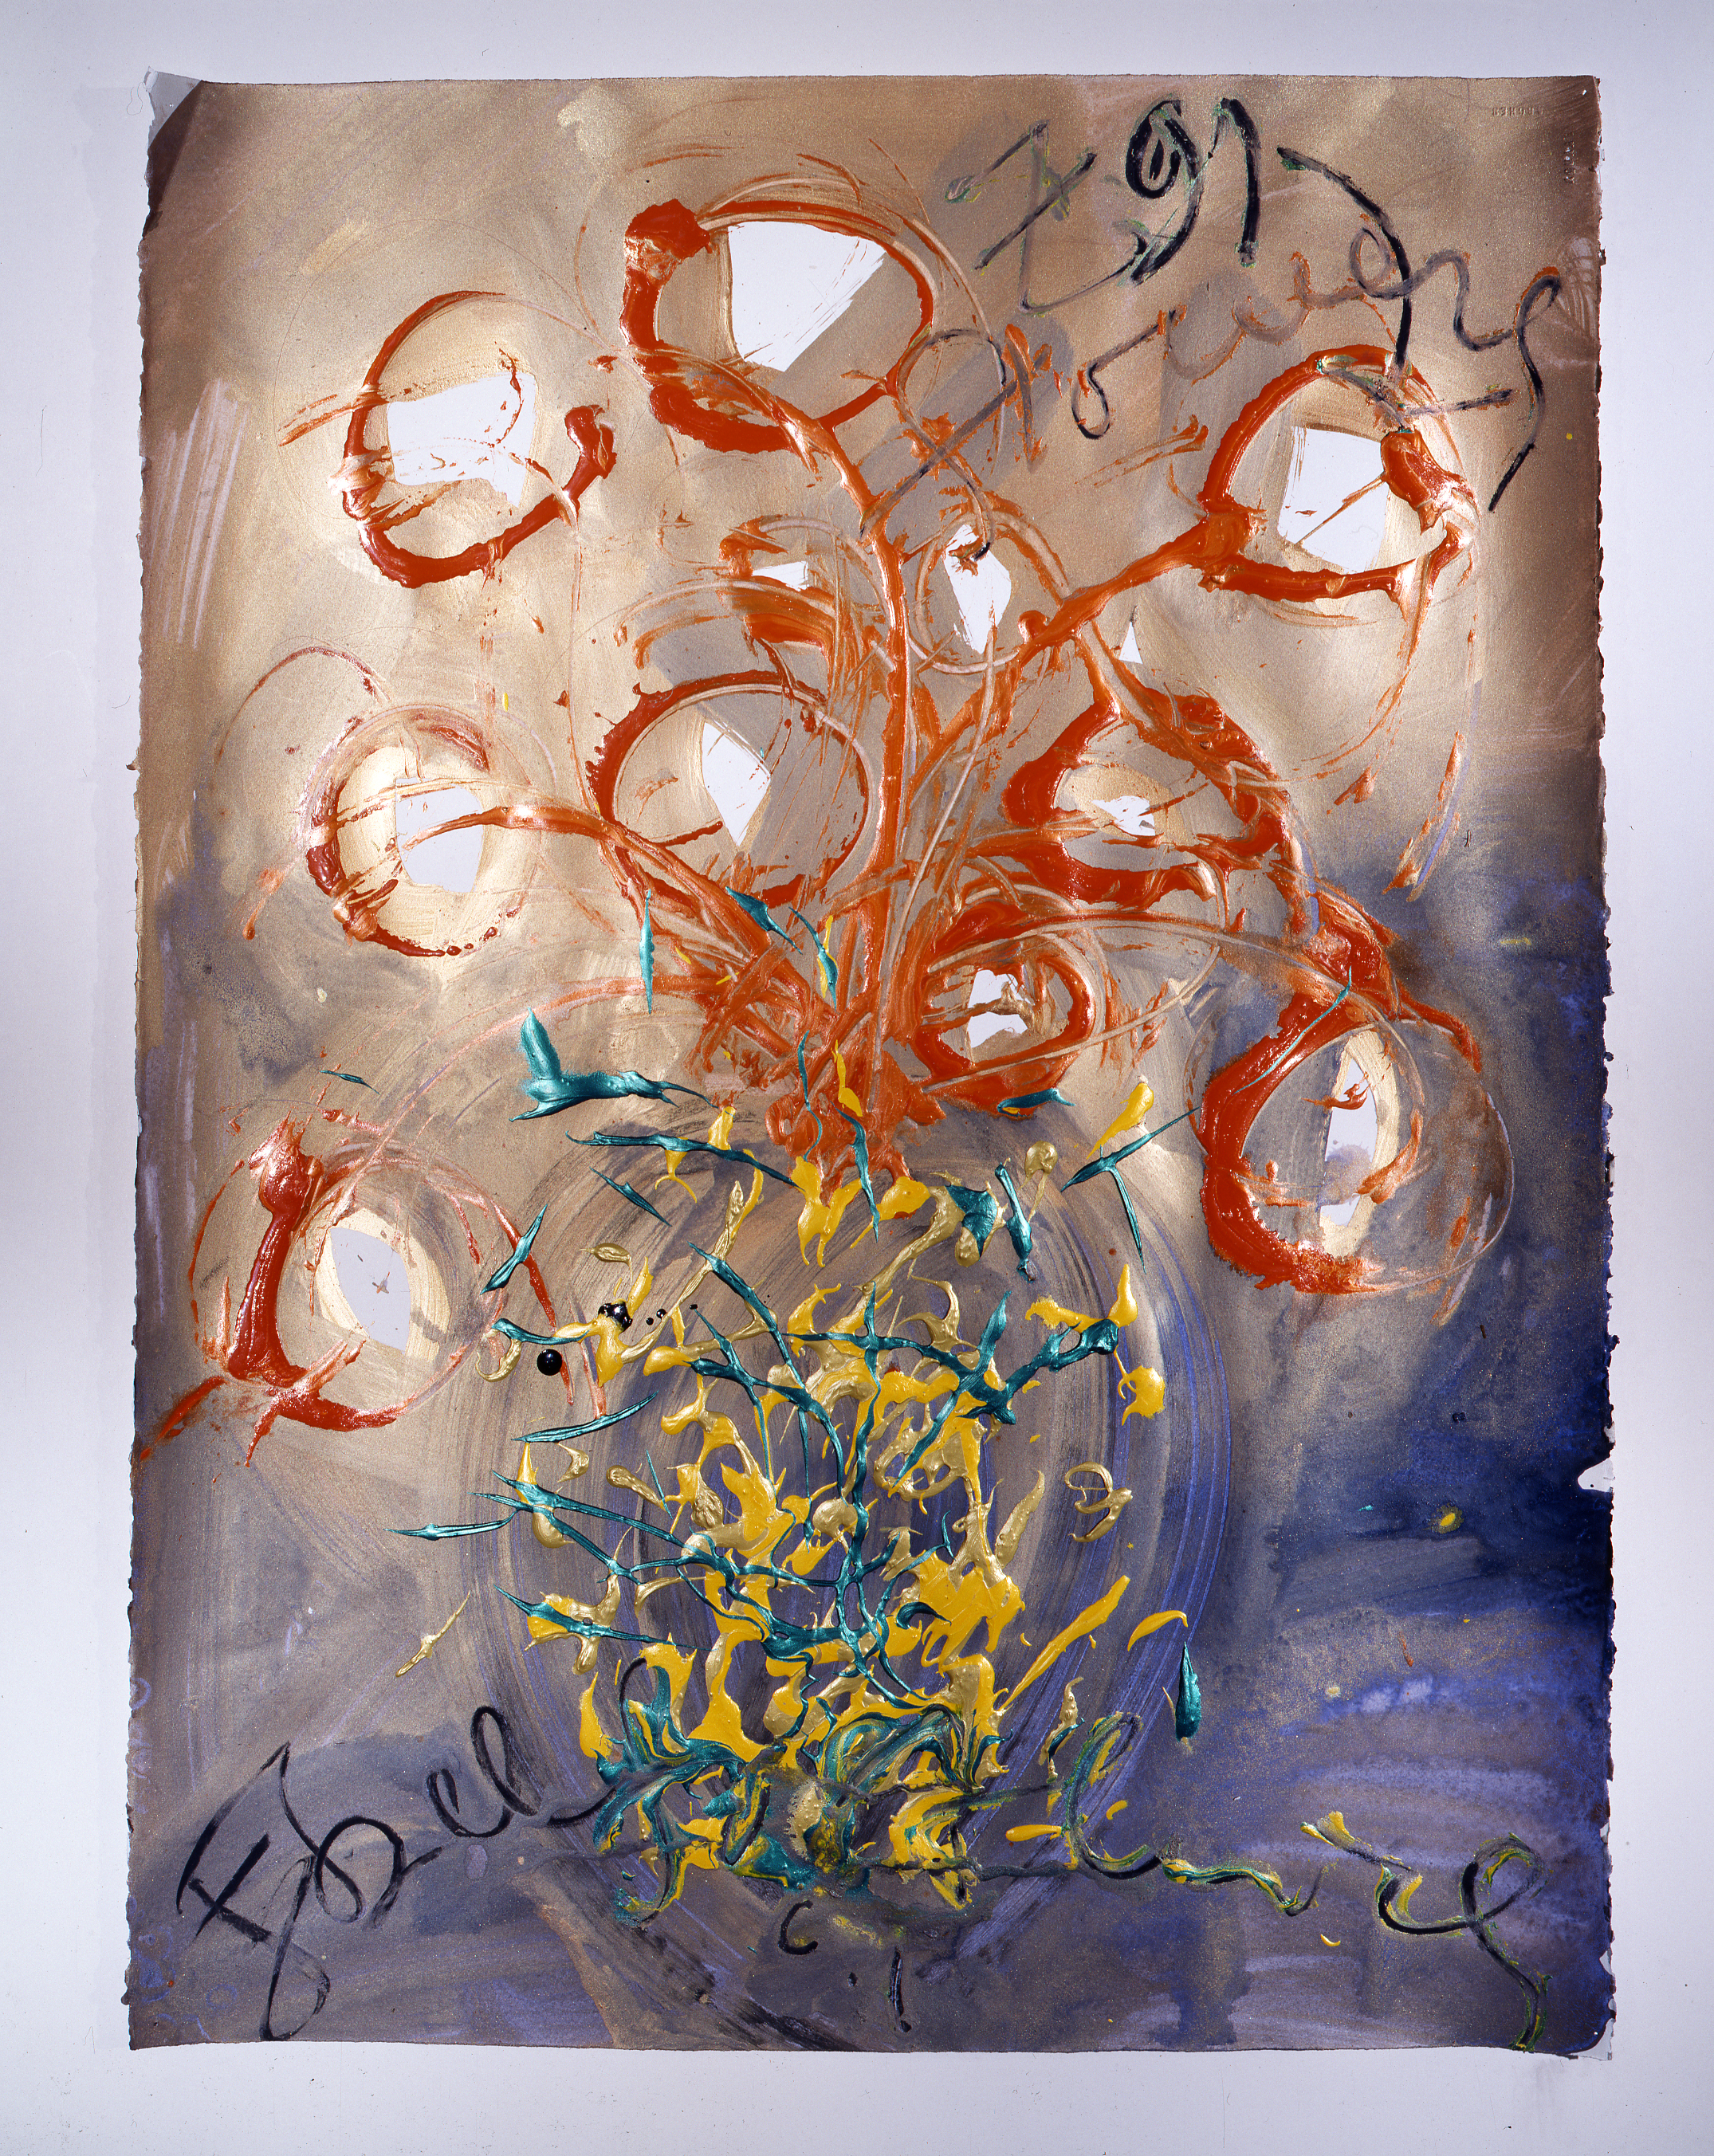  Dale Chihuly,&nbsp; Ebeltoft Drawing,&nbsp; (1991, mixed media on paper, 30 x 22 inches), DC.352 